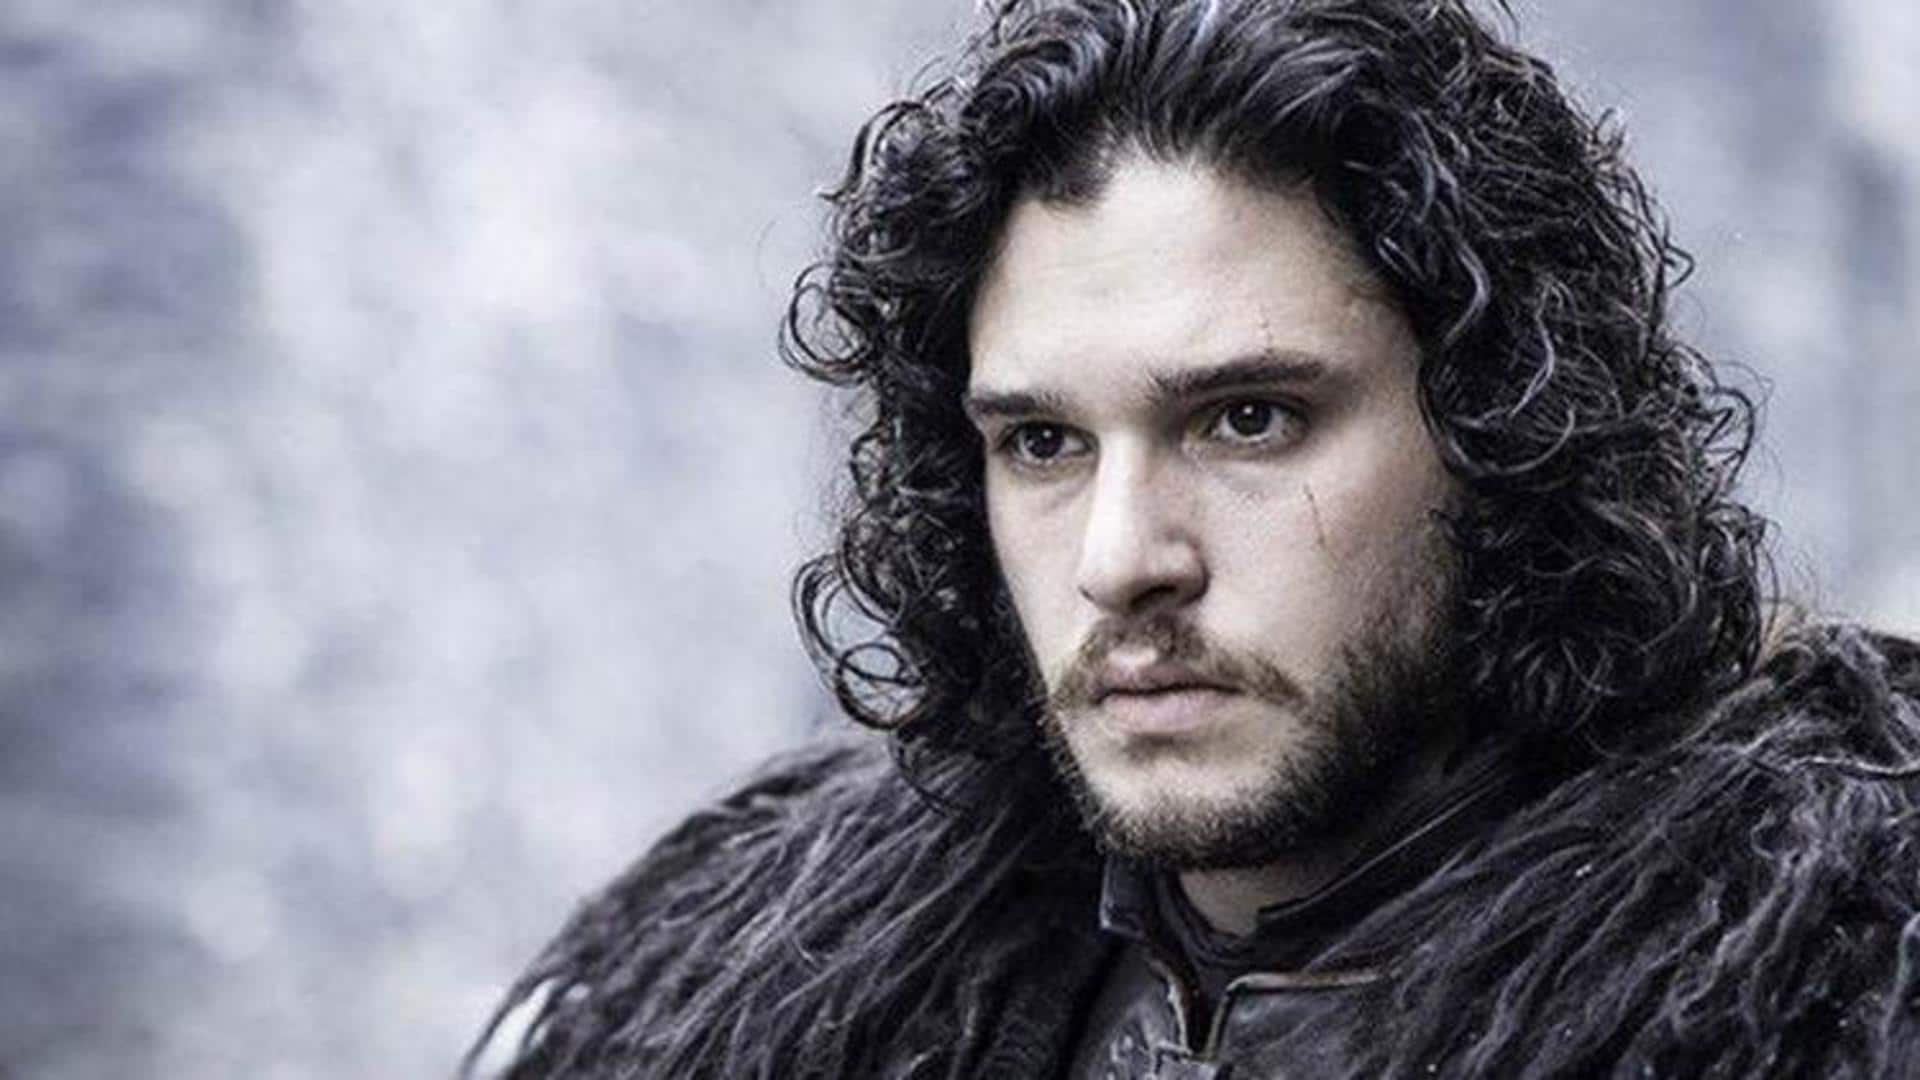 'GoT' Jon Snow spinoff in early stages of development